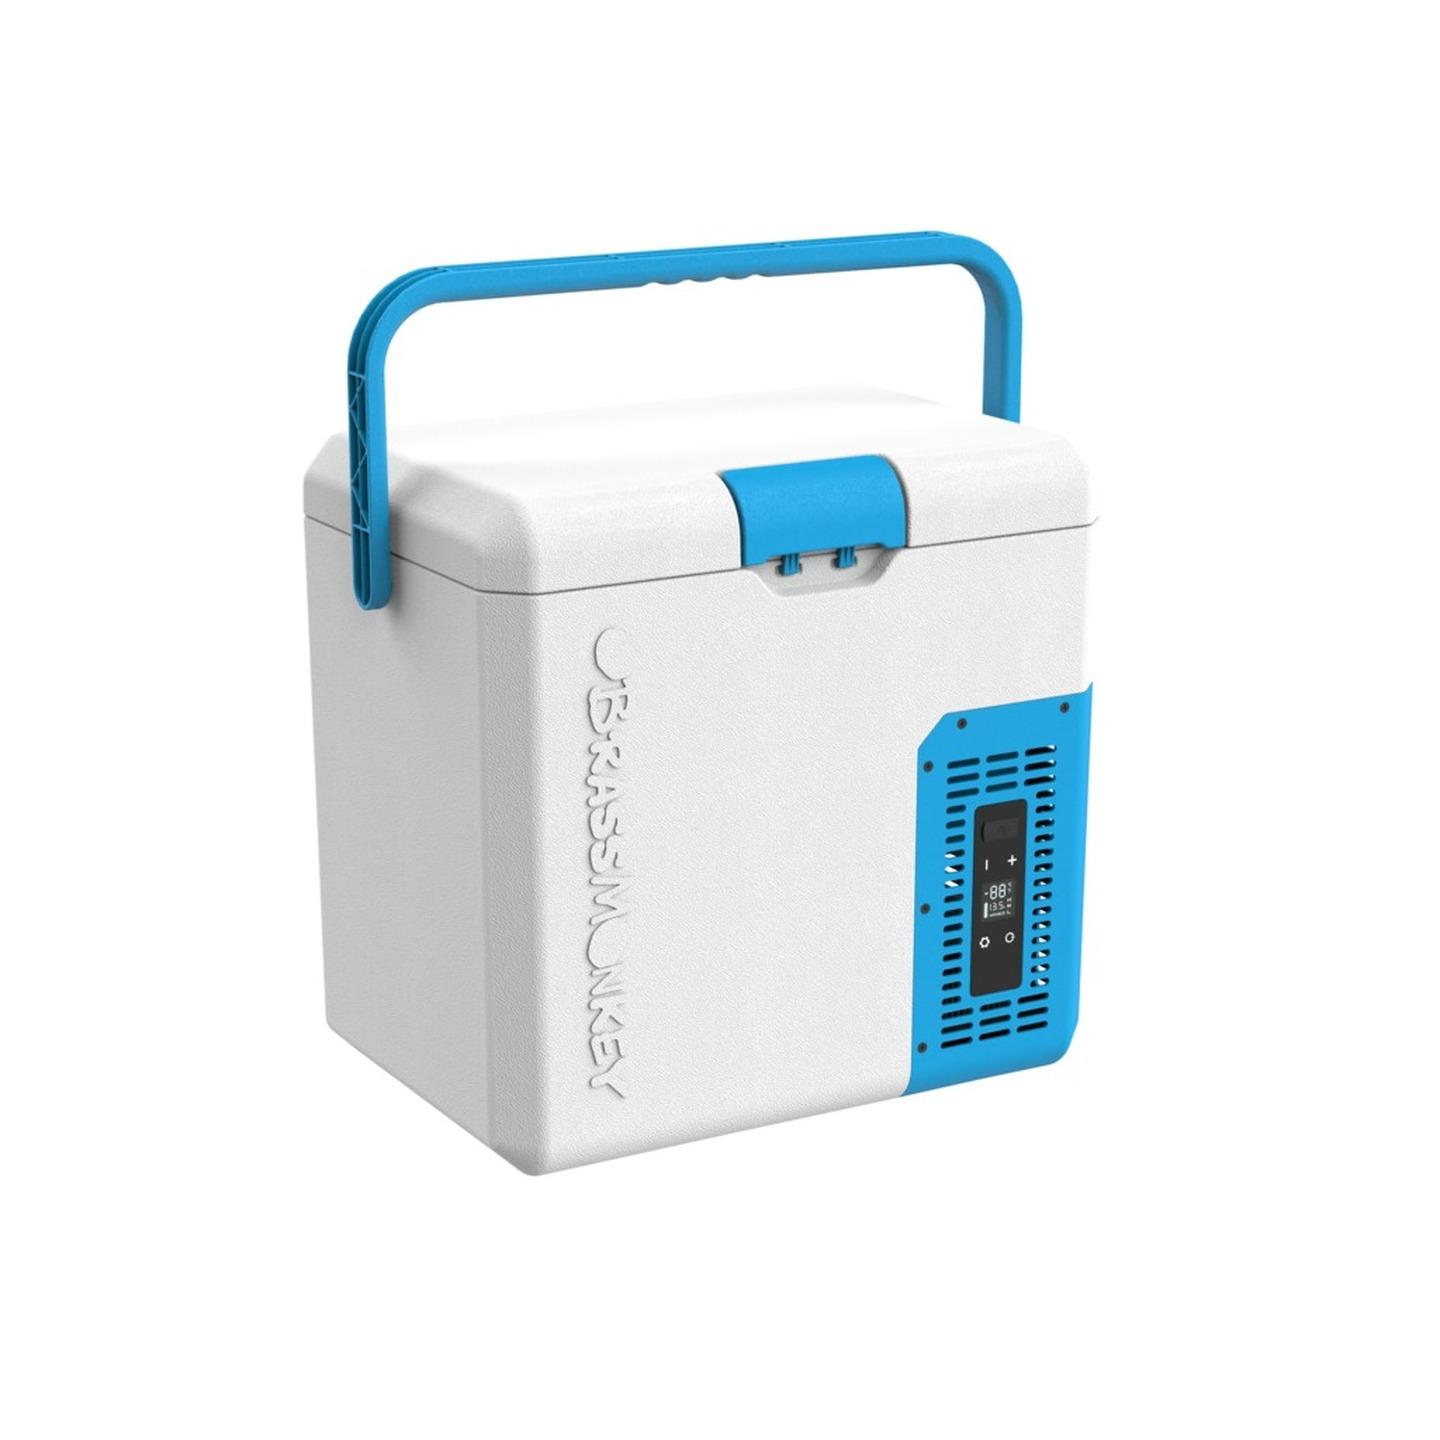 18L Brass Monkey Portable Fridge/Freezer with Carry Handle and Battery Compartment - Blue/White